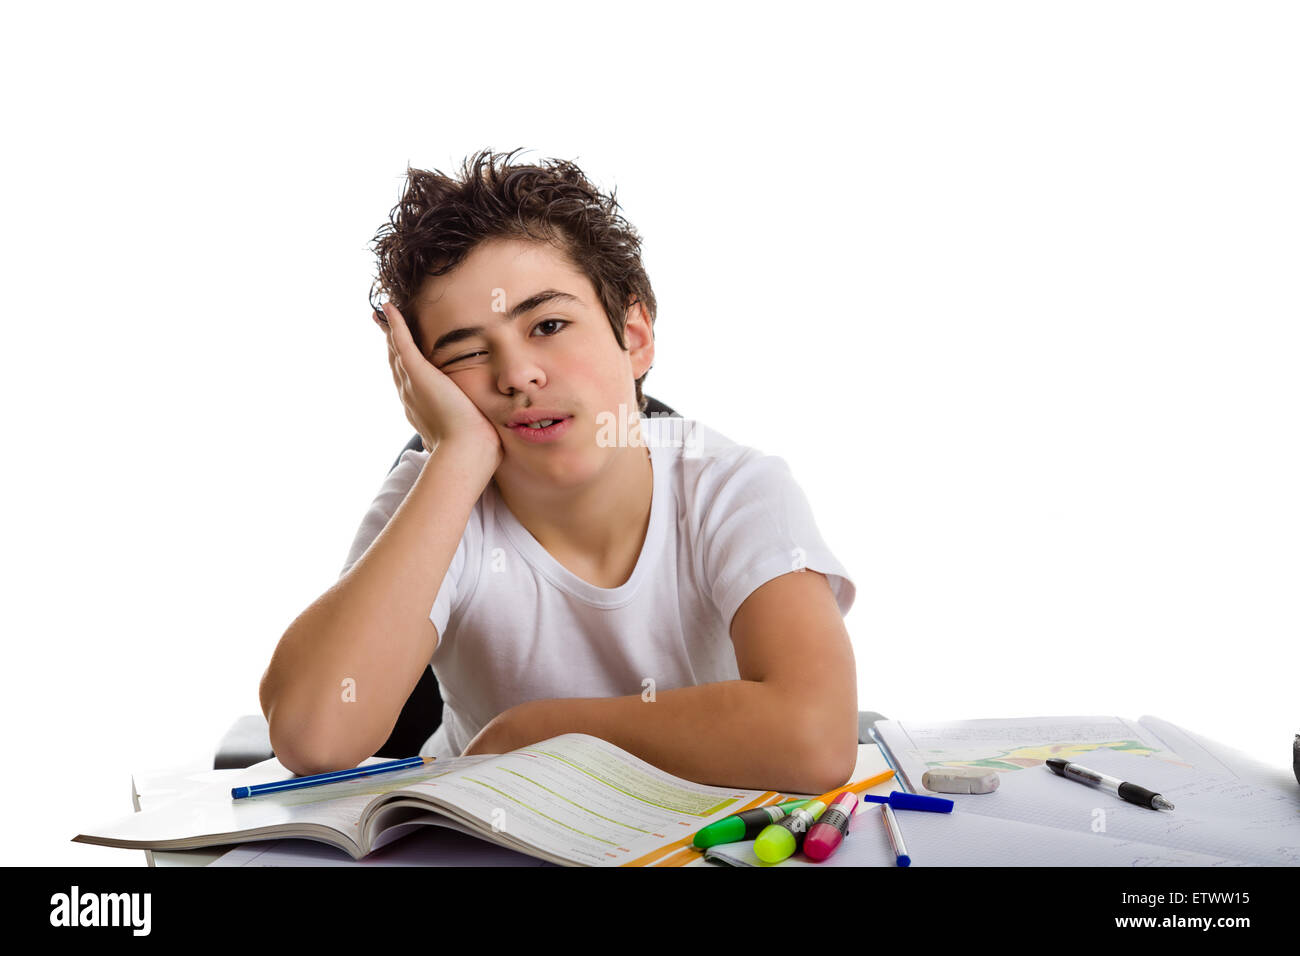 Tired  boy holds his face doing his  homework: he is sadly sitting in front of books,copybooks and pencils Stock Photo